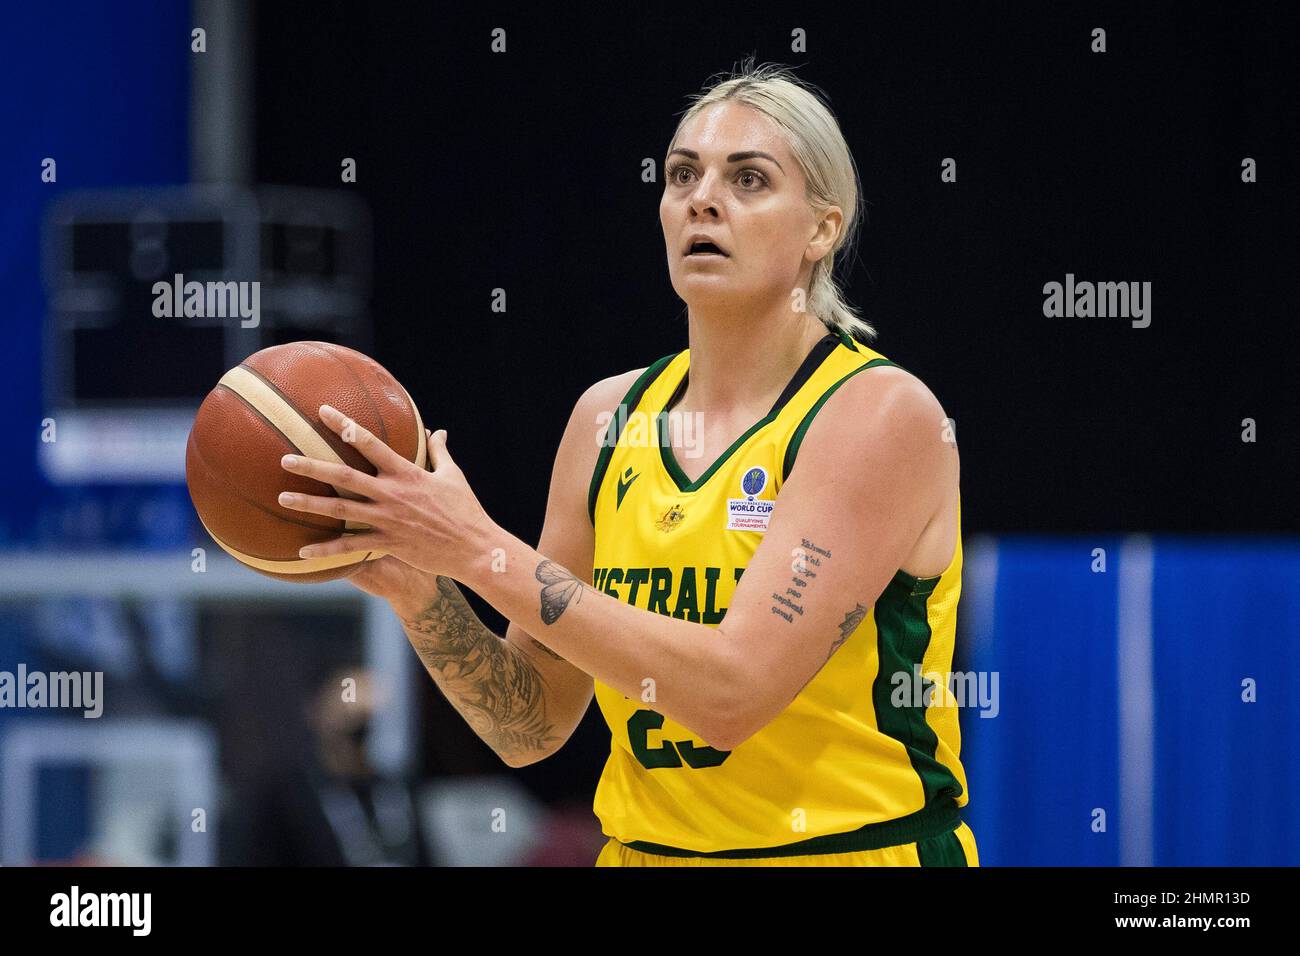 Belgrade, Serbia, 10th February 2022. Cayia George of Australia in action during the FIBA Women's Basketball World Cup Qualifying Tournament match between Australia v Brazil in Belgrade, Serbia. February 10, 2022. Credit: Nikola Krstic/Alamy Stock Photo